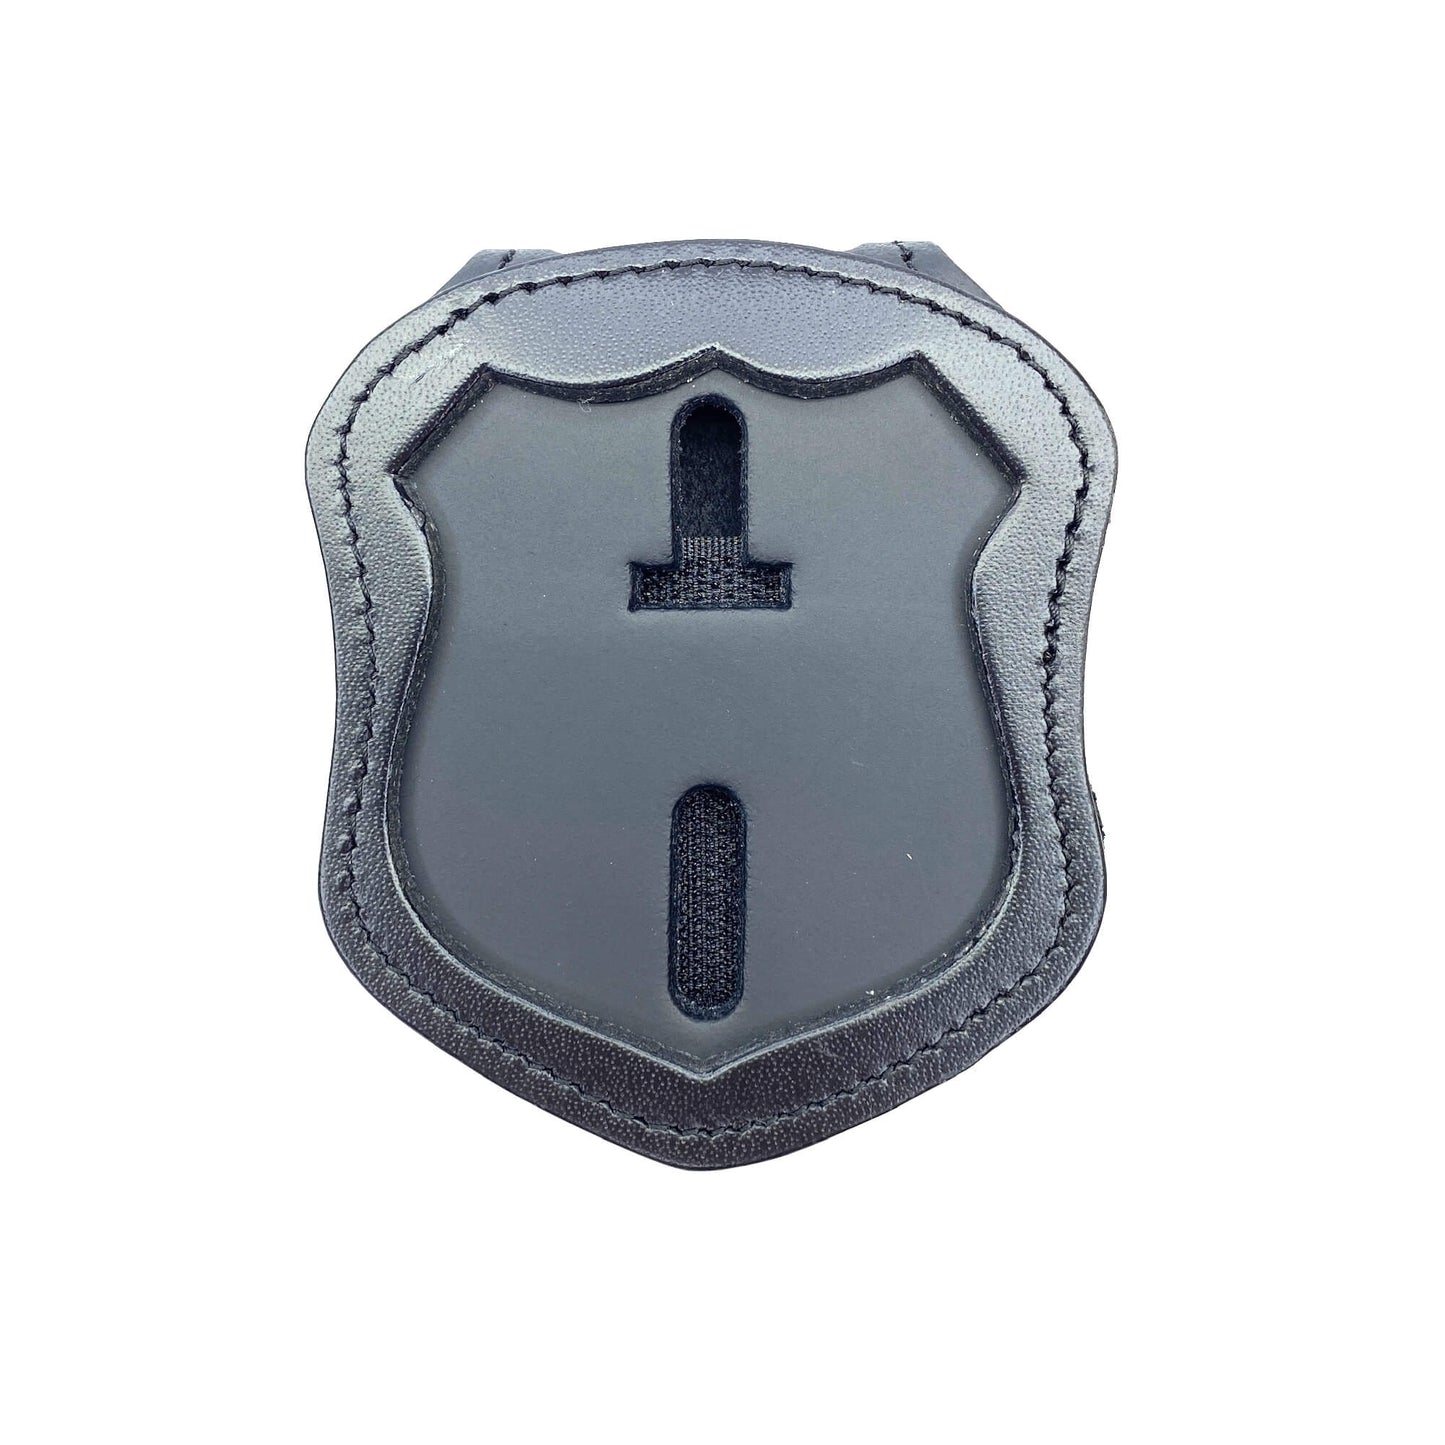 New York Police Department (NYPD) Police Officer Badge Belt Holder & Neck Chain-Perfect Fit-911 Duty Gear USA